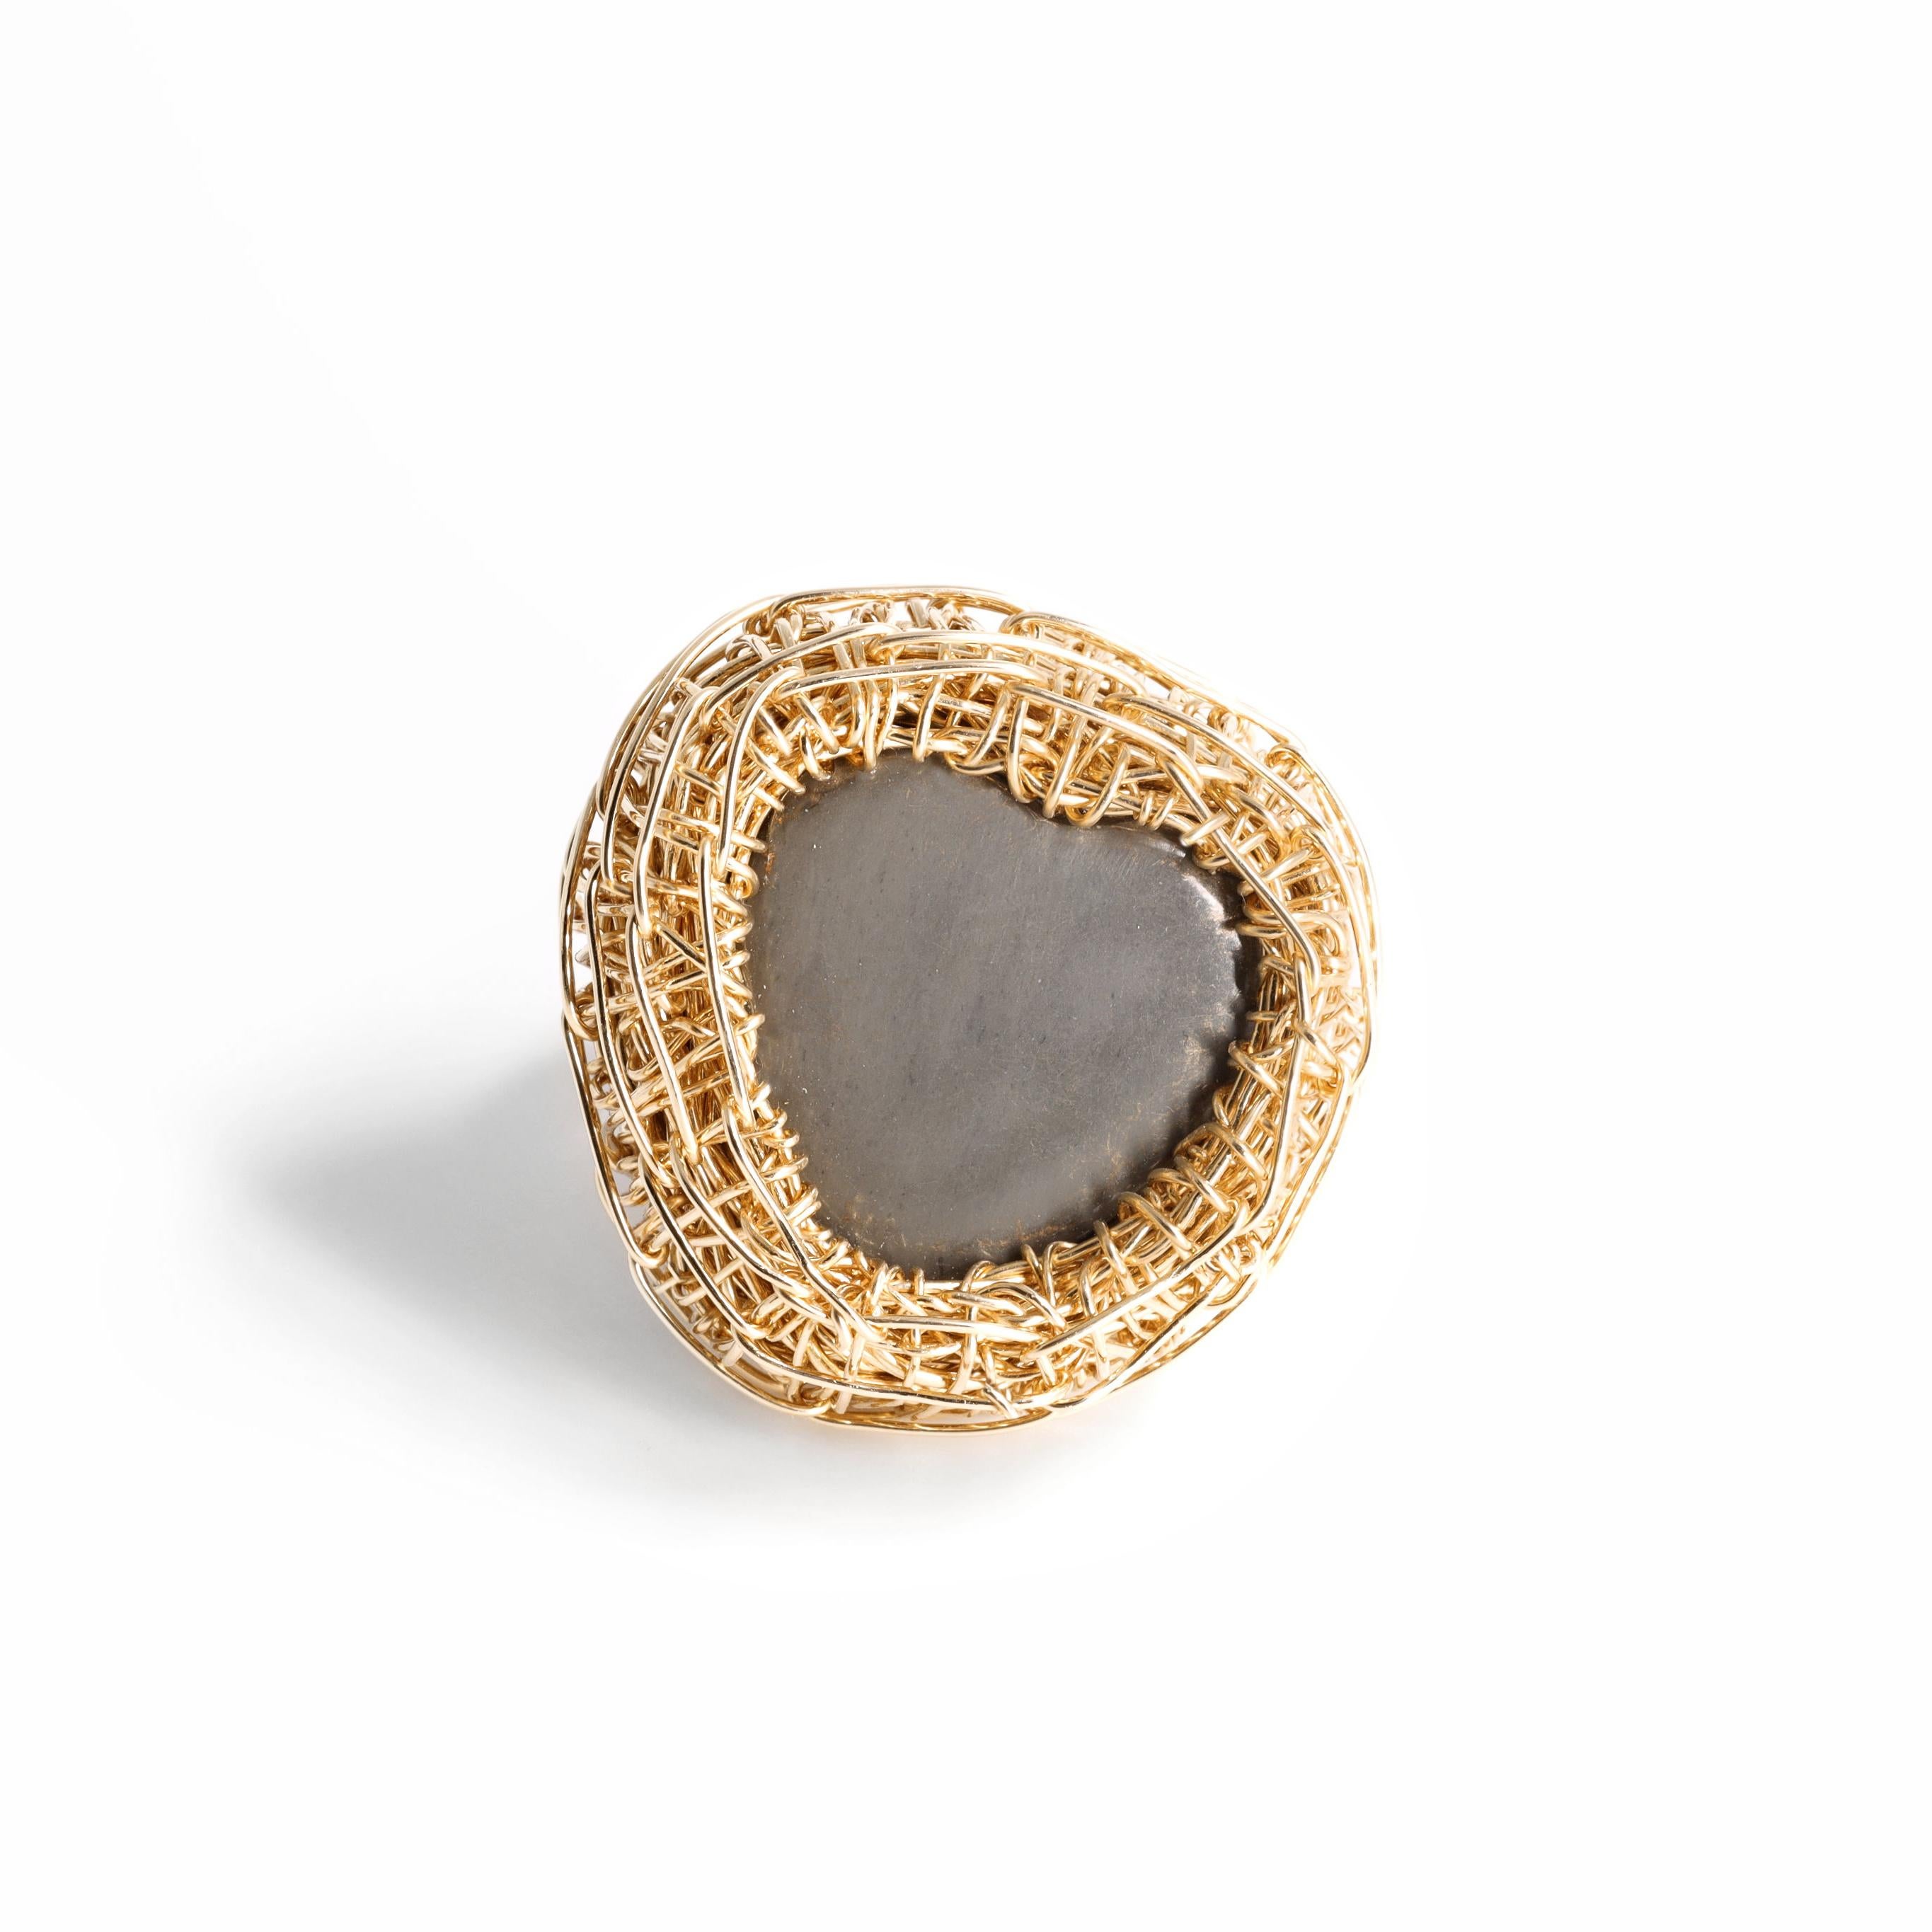 Heart Shaped Grey Stone Statement Cocktail Ring in 14k Gold F. by the Artist For Sale 2